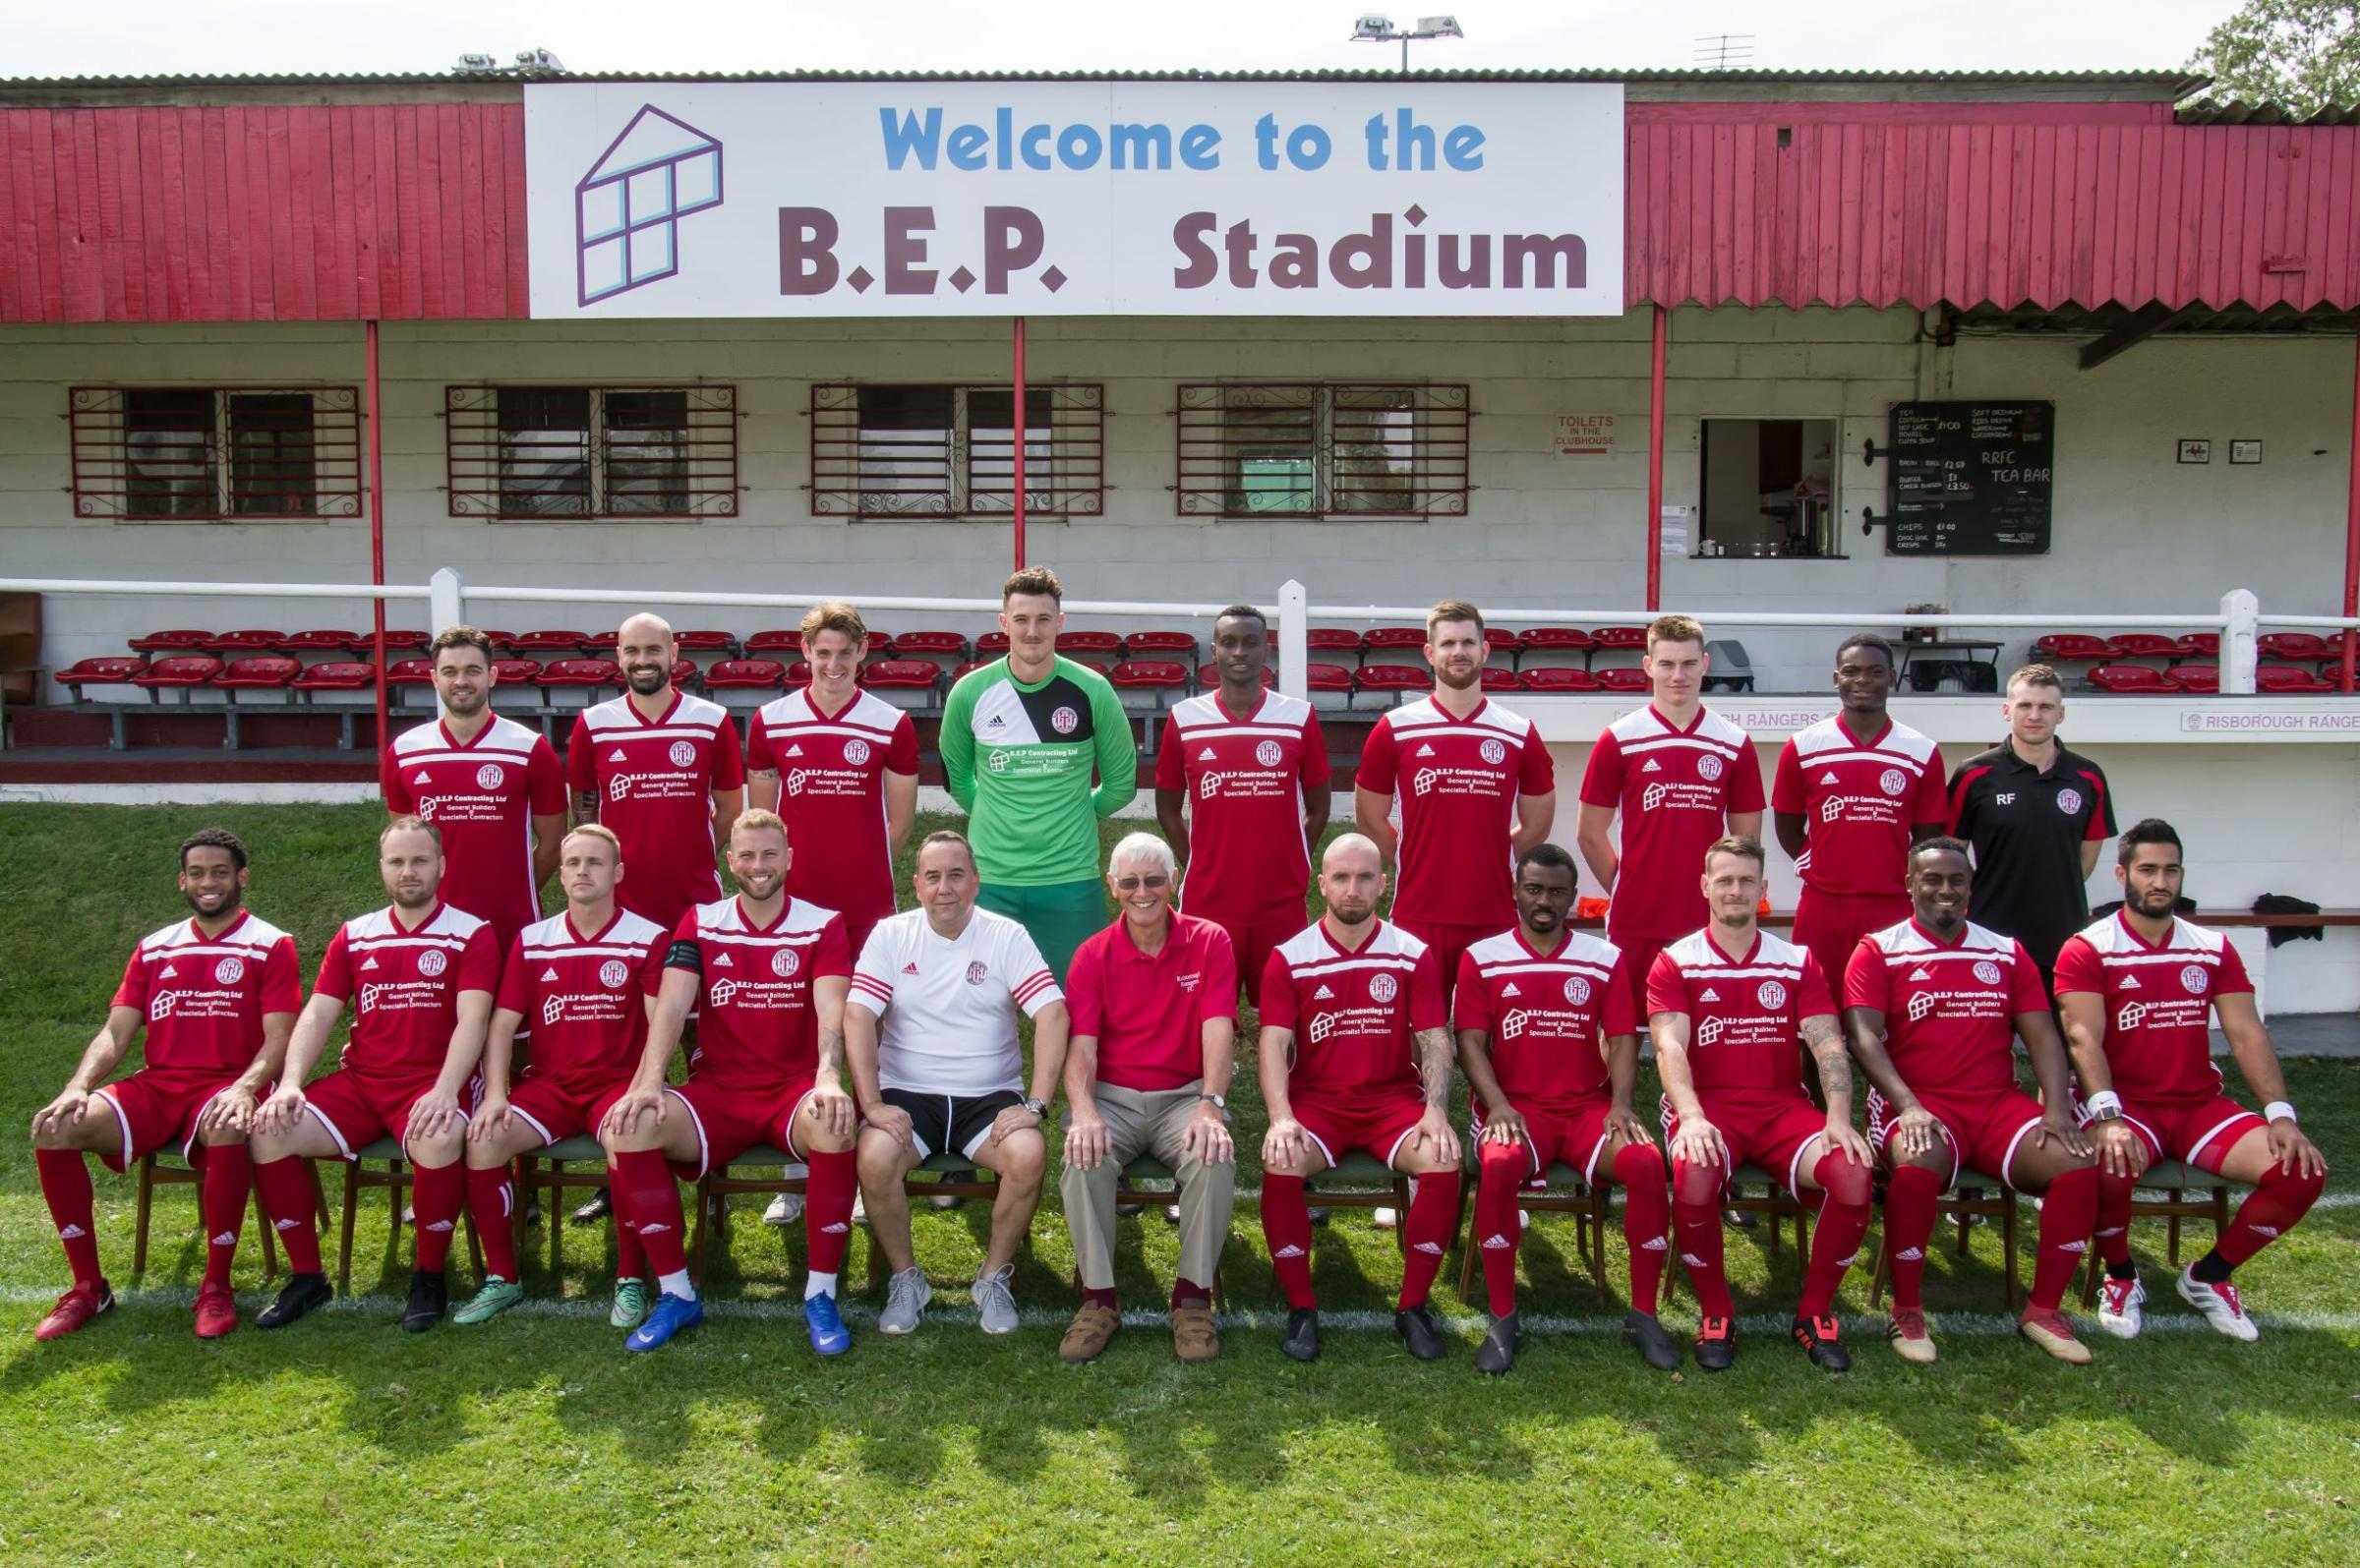 The team from the 2019/20 season 